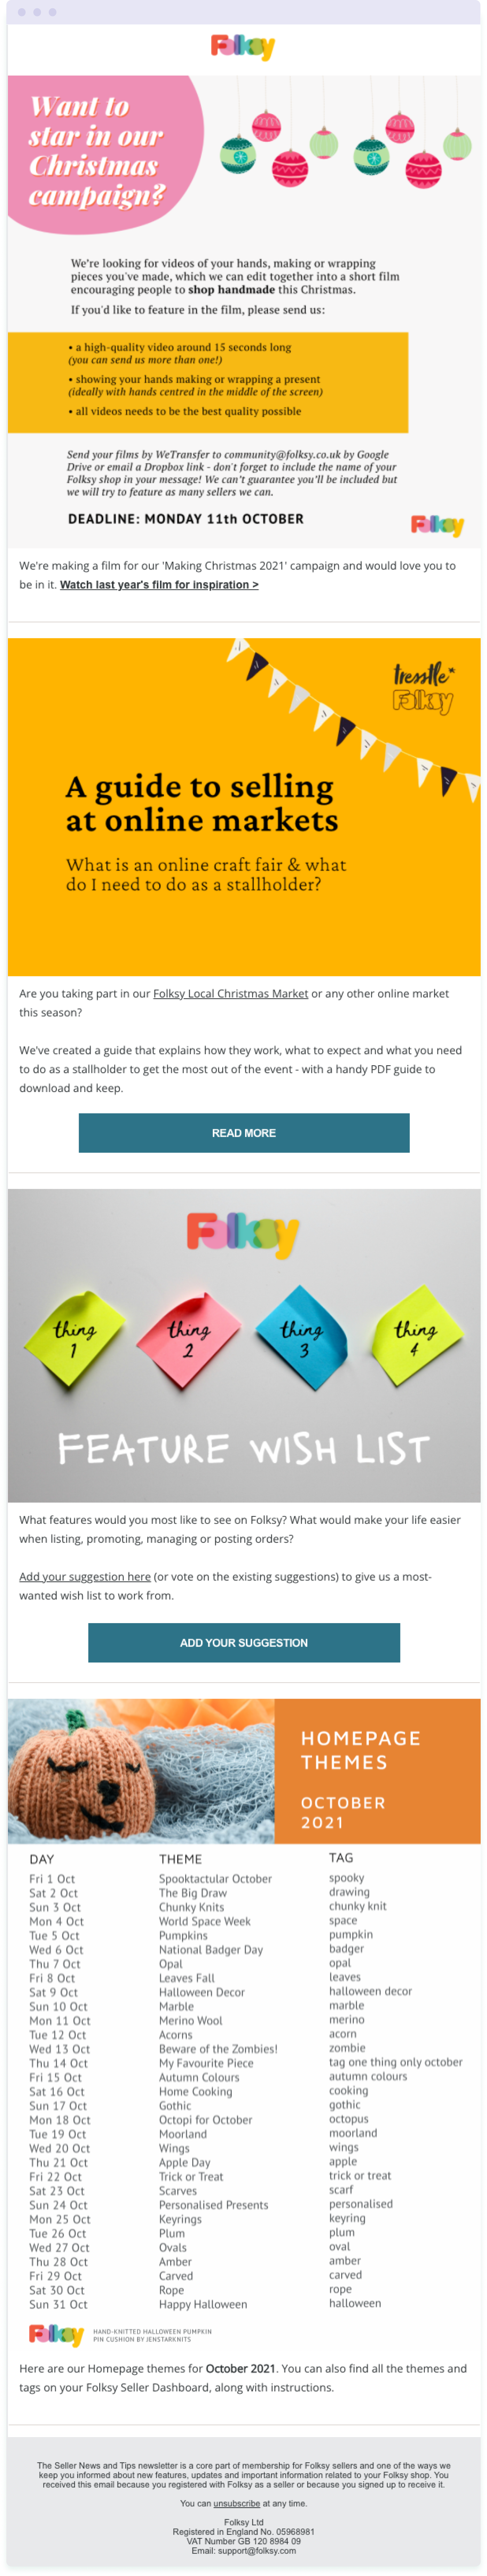 Example of a newsletter email from Folksy – just one type of email you can send to subscribers when getting started with email marketing